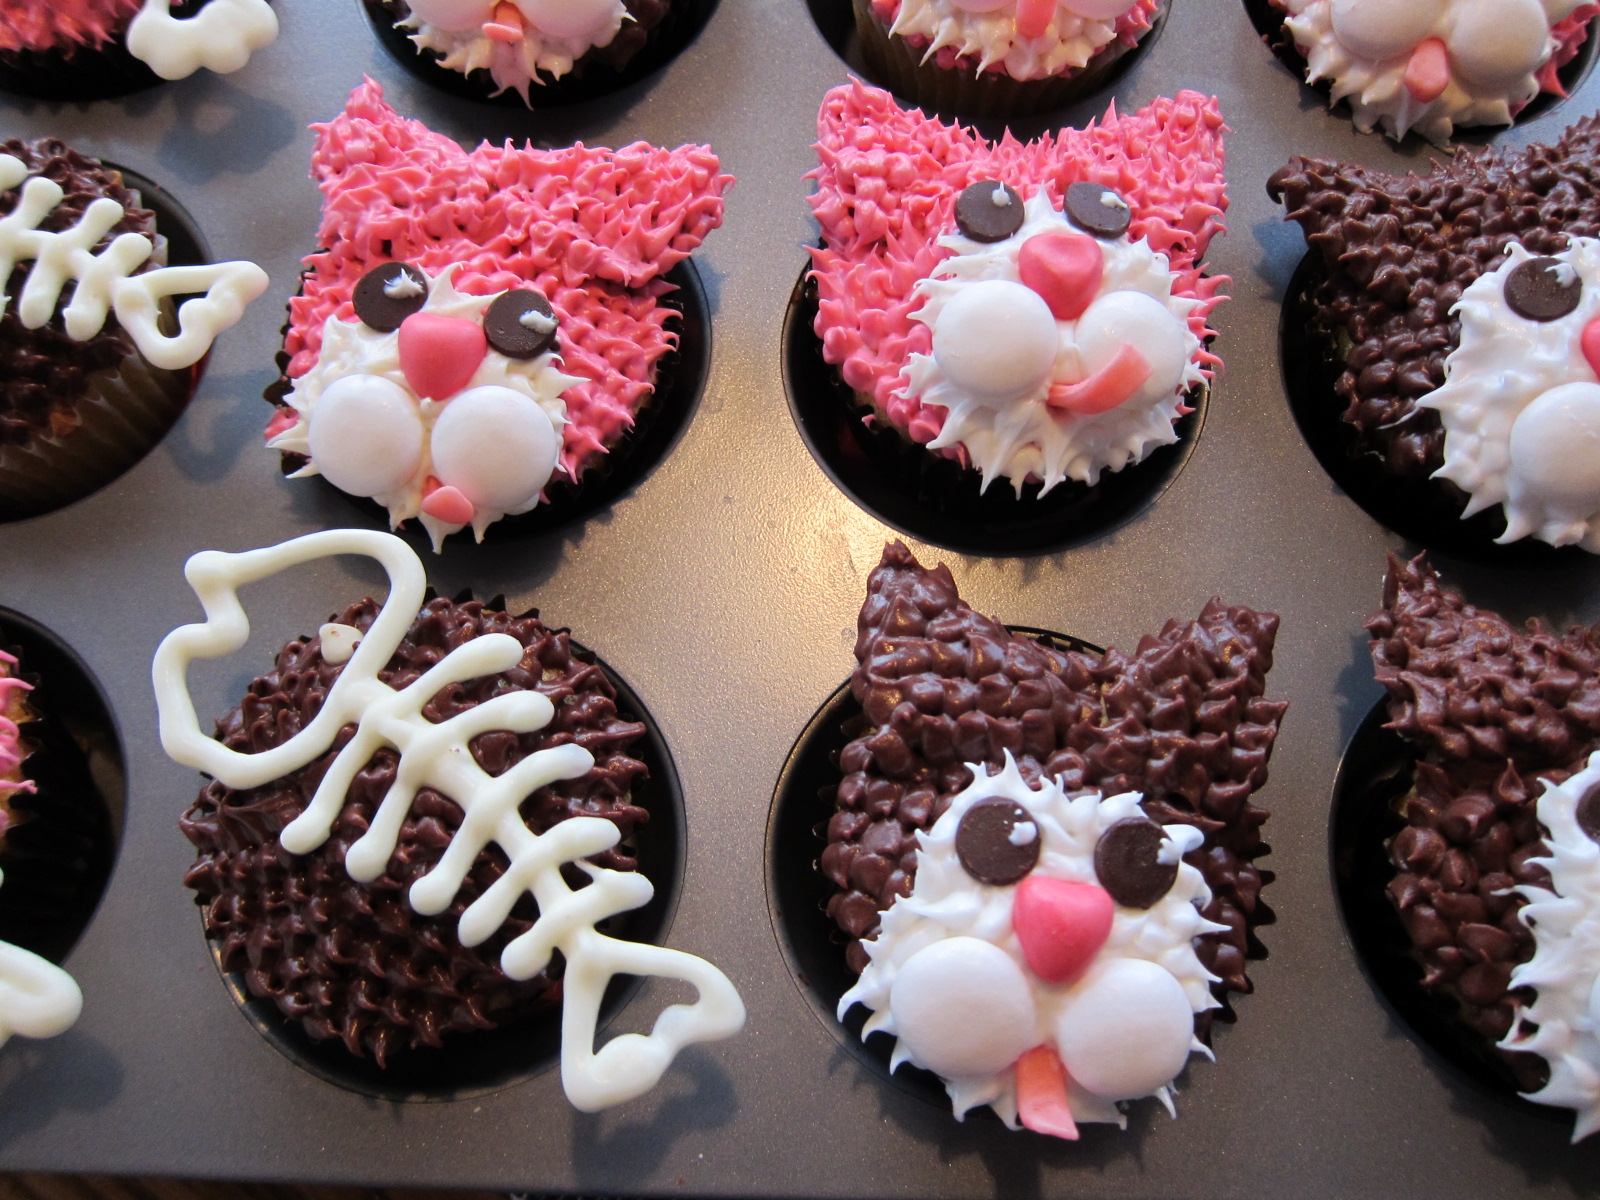 Kitty Cat Cupcakes cupcakes after college